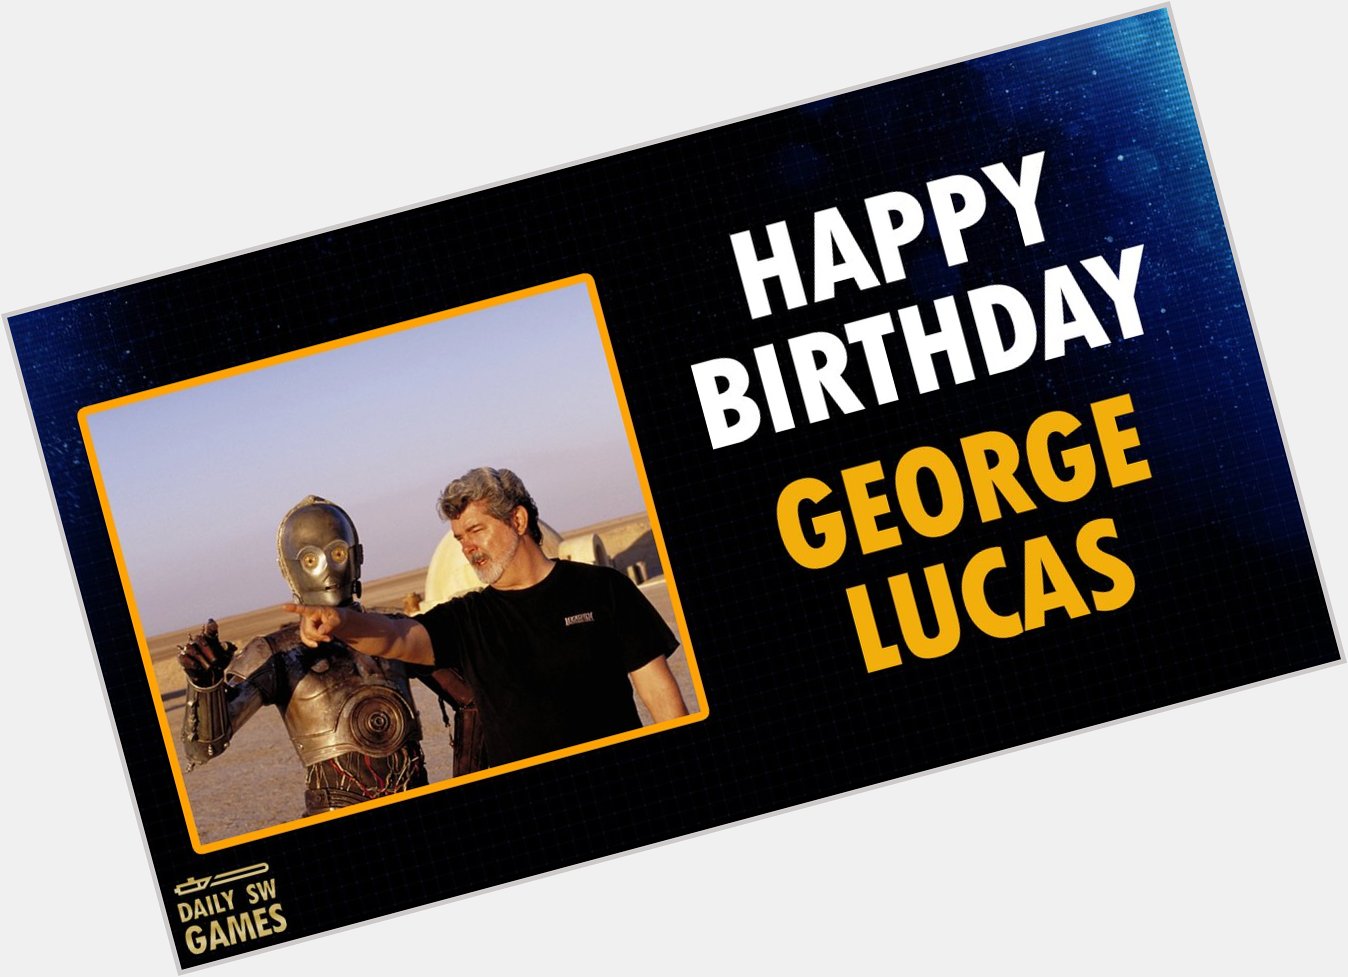 Thank the maker!

Happy birthday to the legendary creative visionary behind Star Wars, George Lucas. 